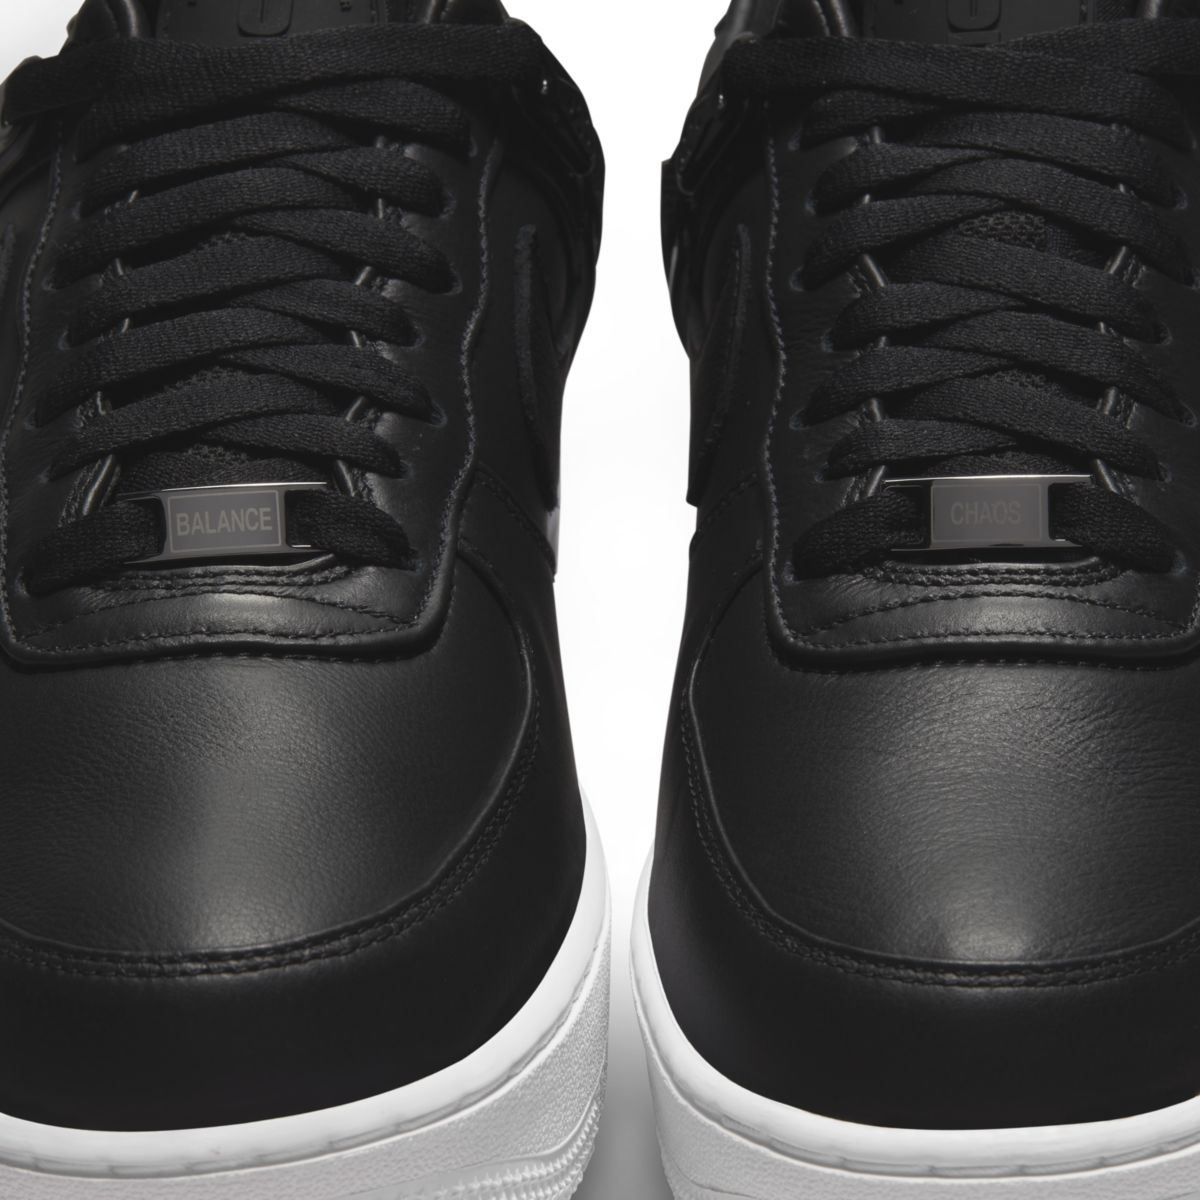 Undercover x Nike Air Force 1 Low Black DQ7558-002 11